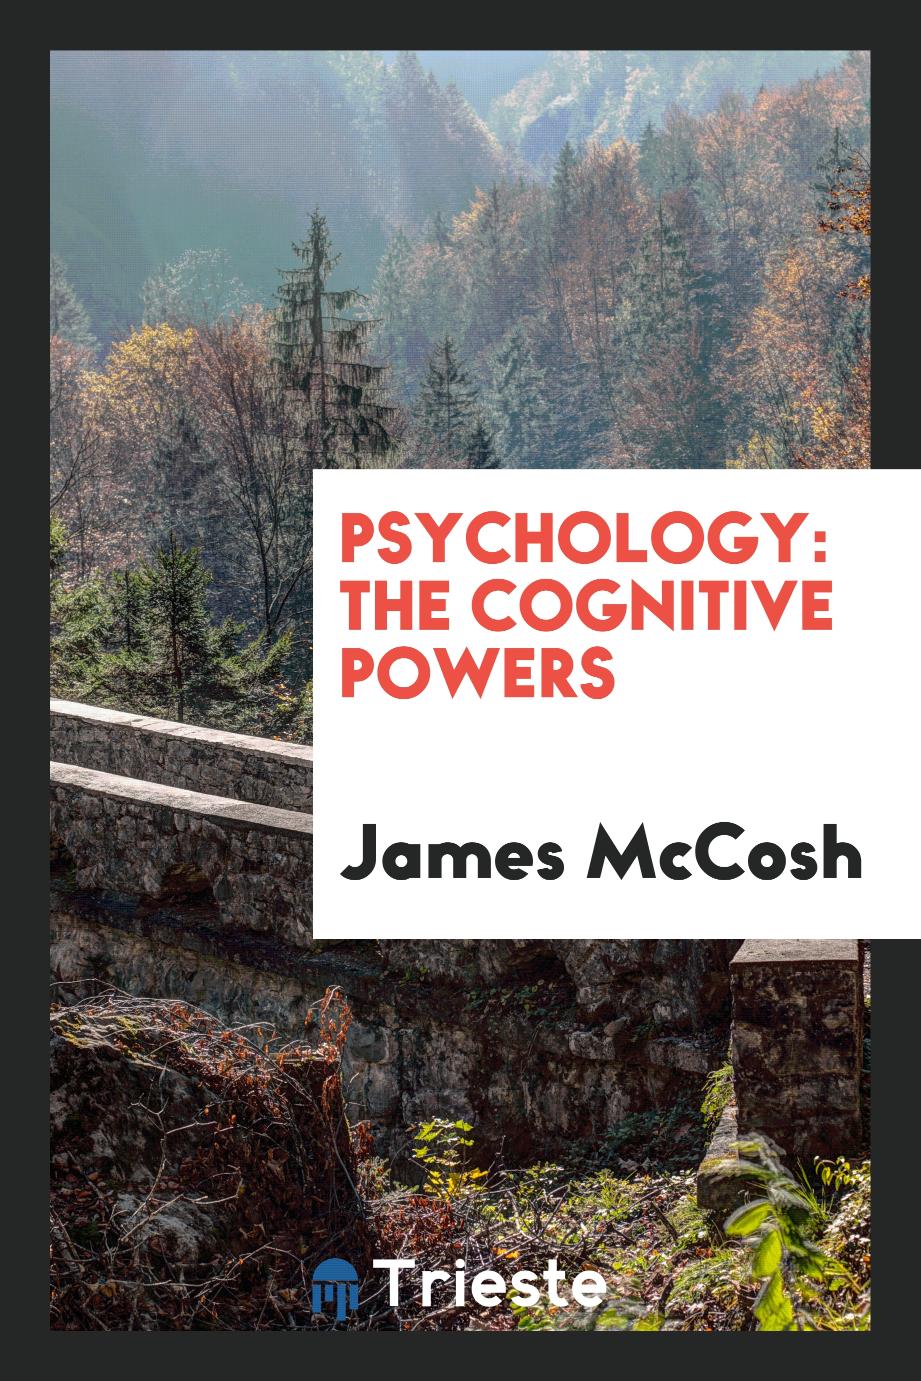 Psychology: the cognitive powers